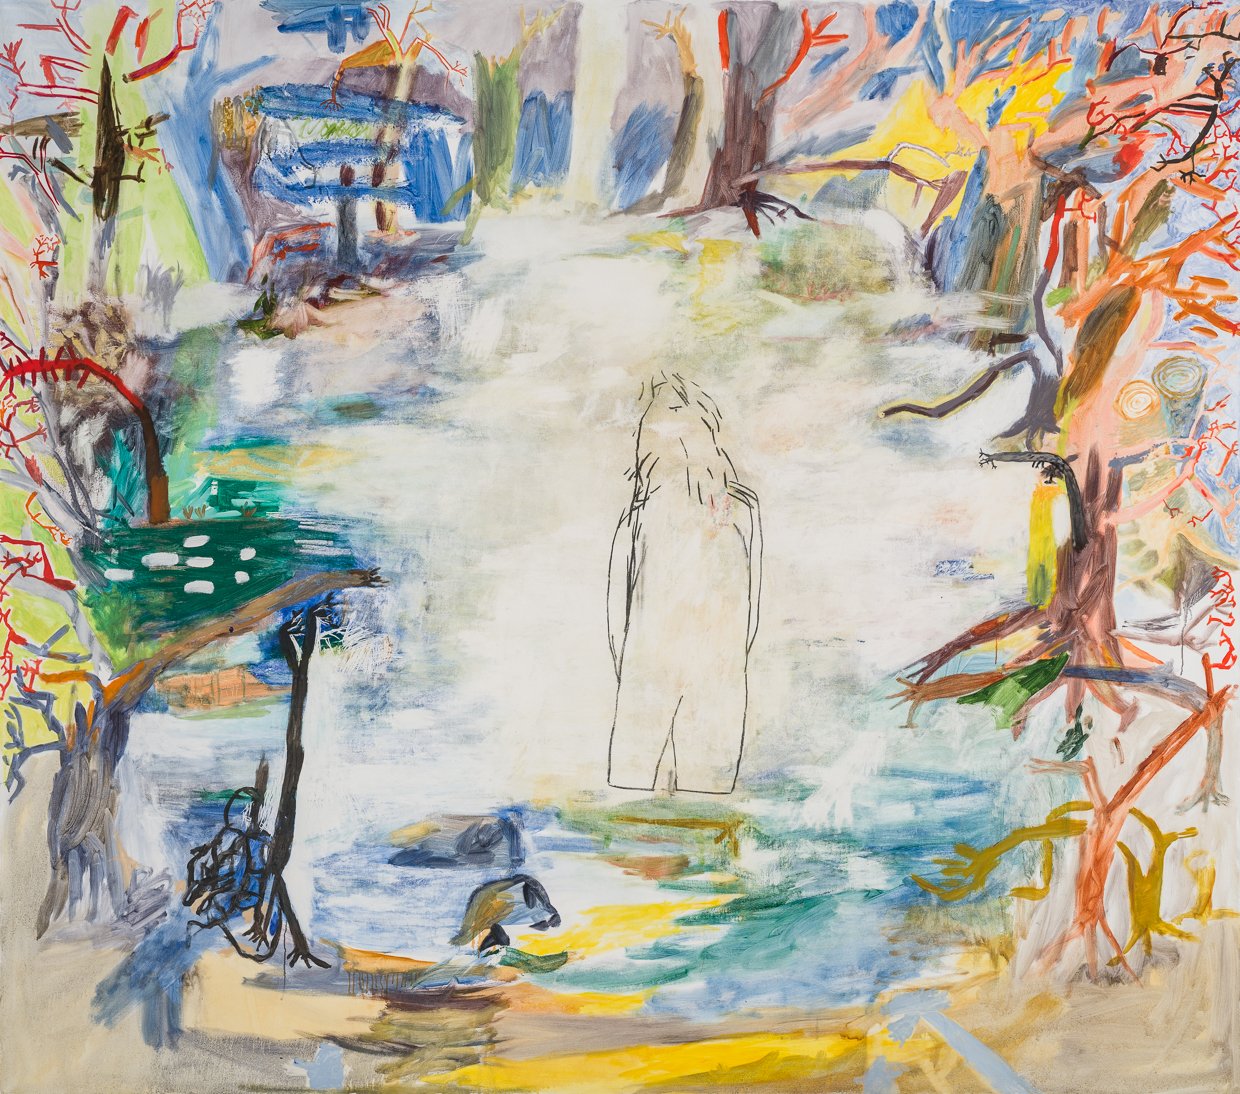  In the Pond, 2021. Oil on un-stretched canvas, 72” x 84” 